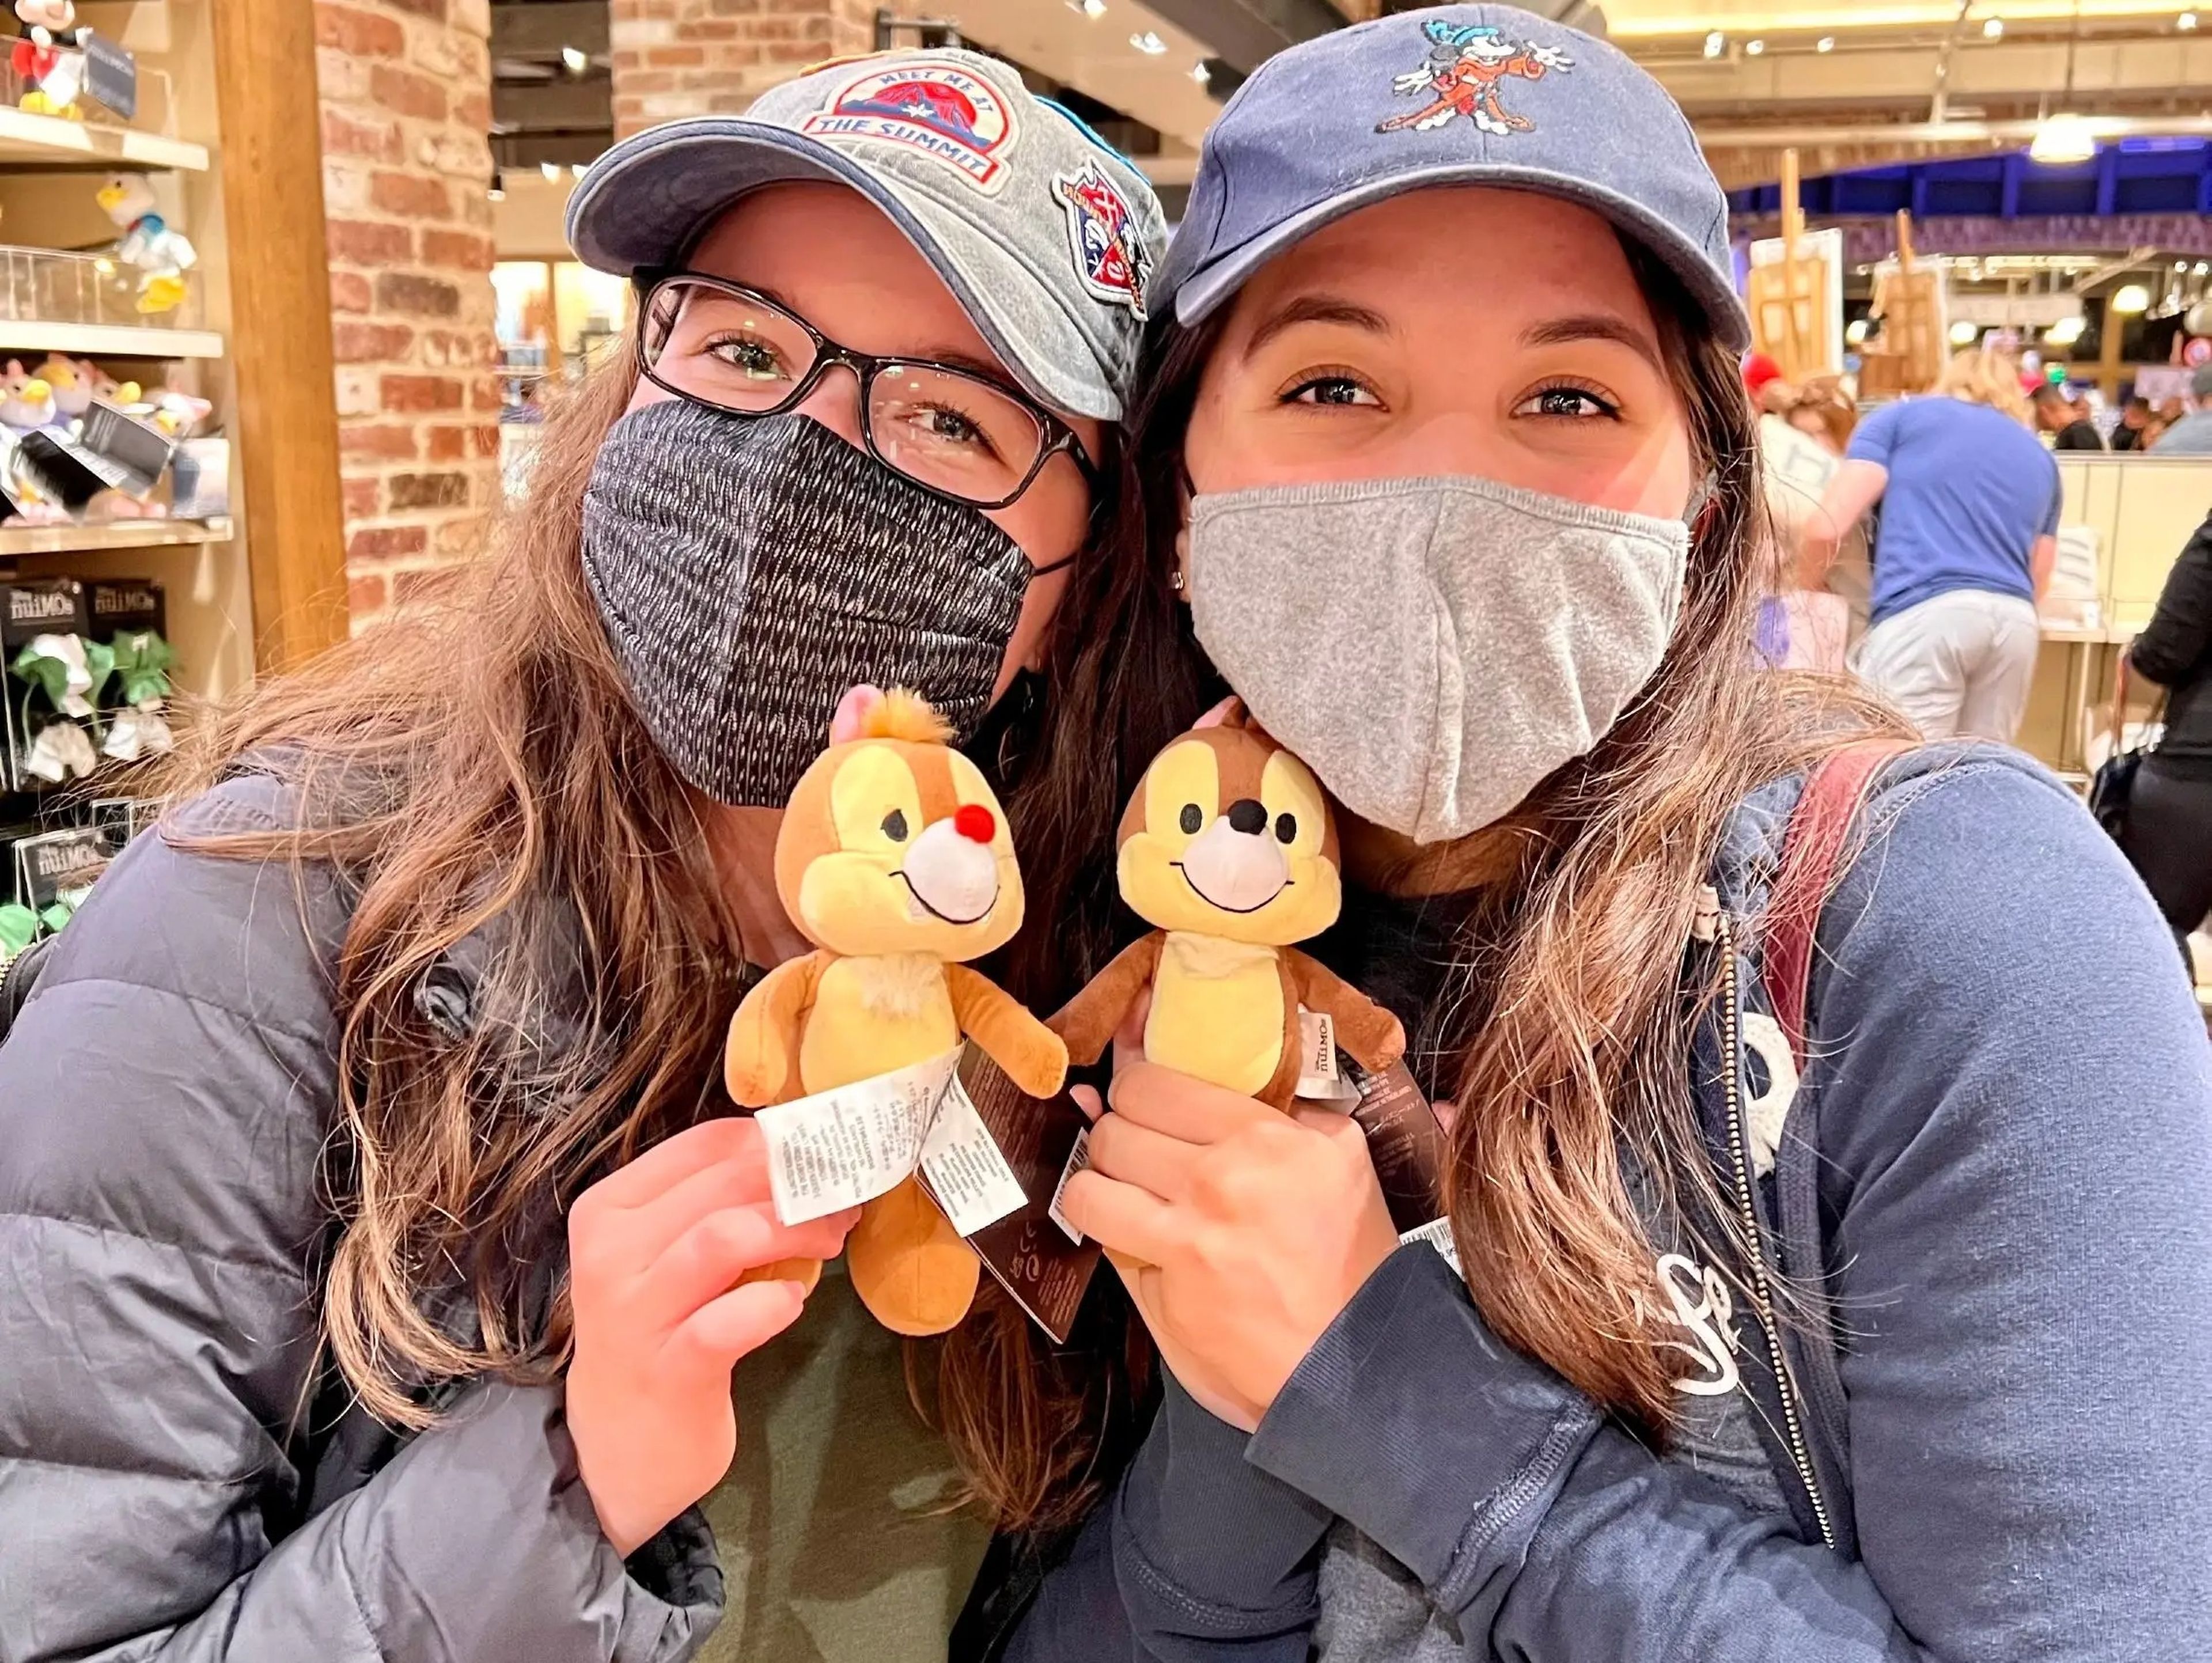 sofia and a friend holding up chip and dale stuffed animals in a merchandise shop in disney world